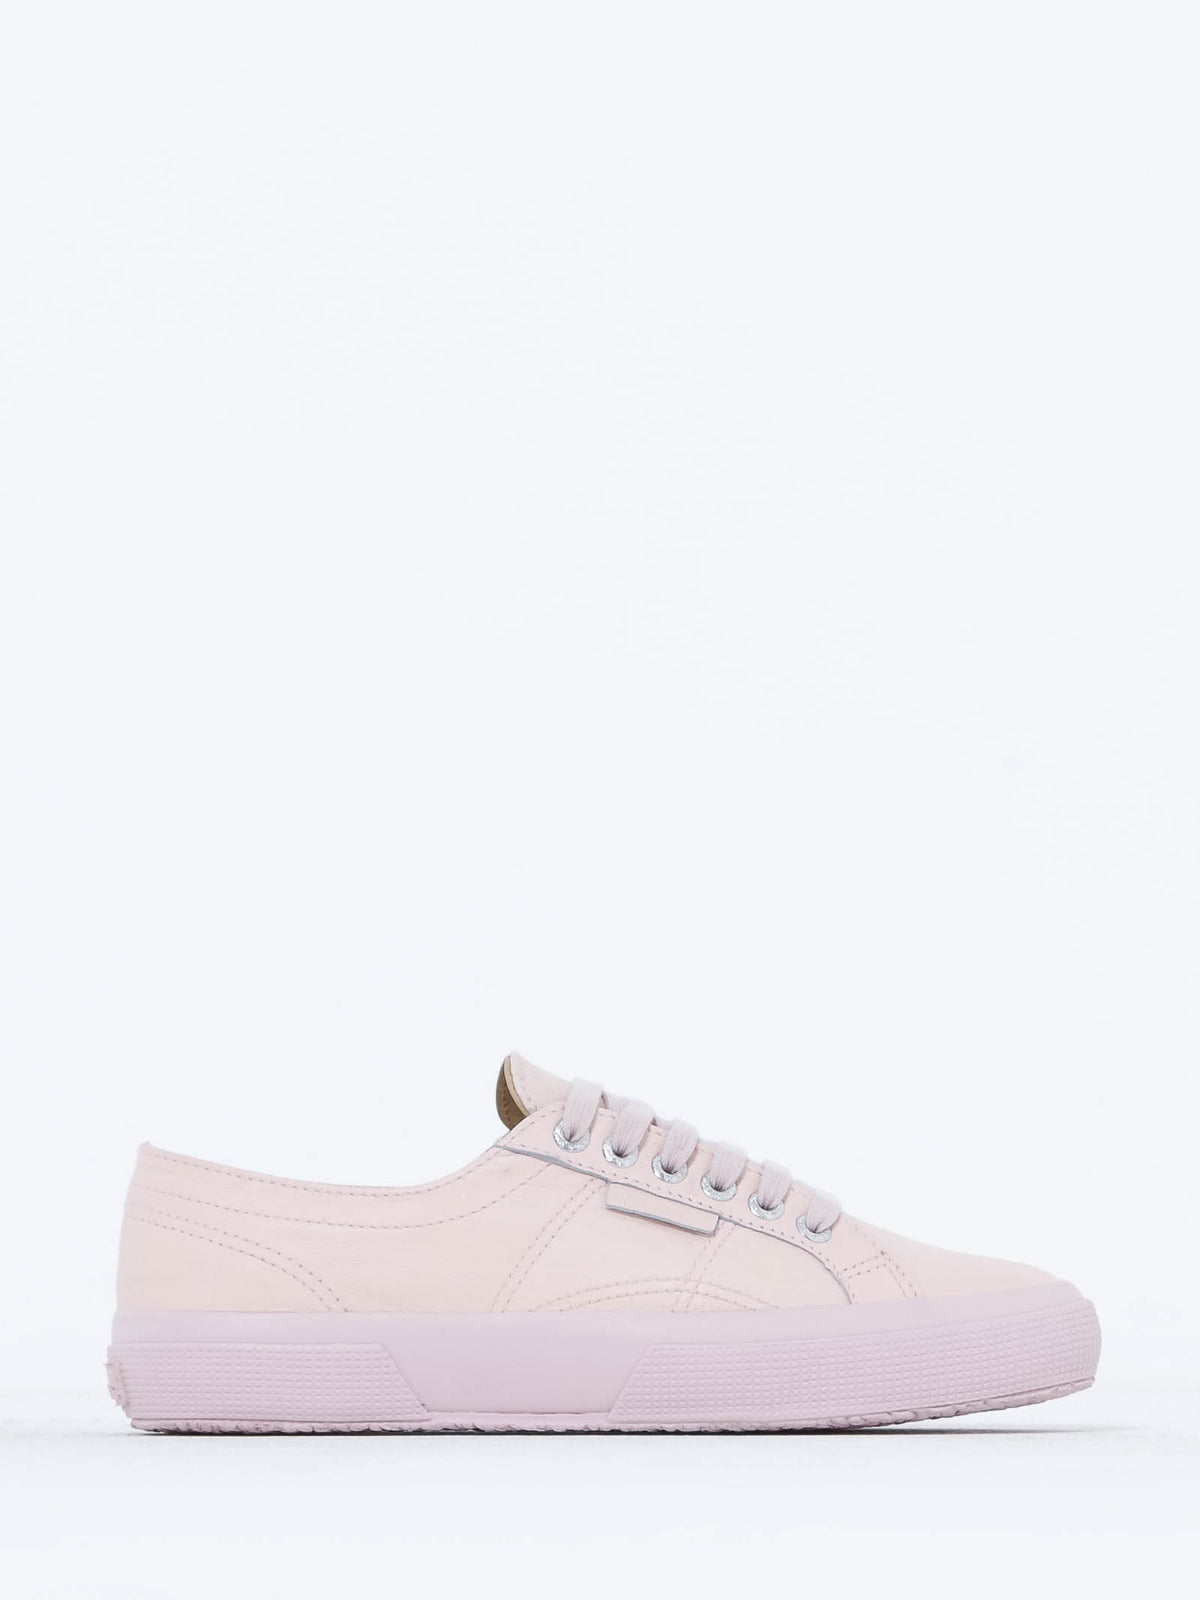 Womens 2750 Sneakers in Pink Leather